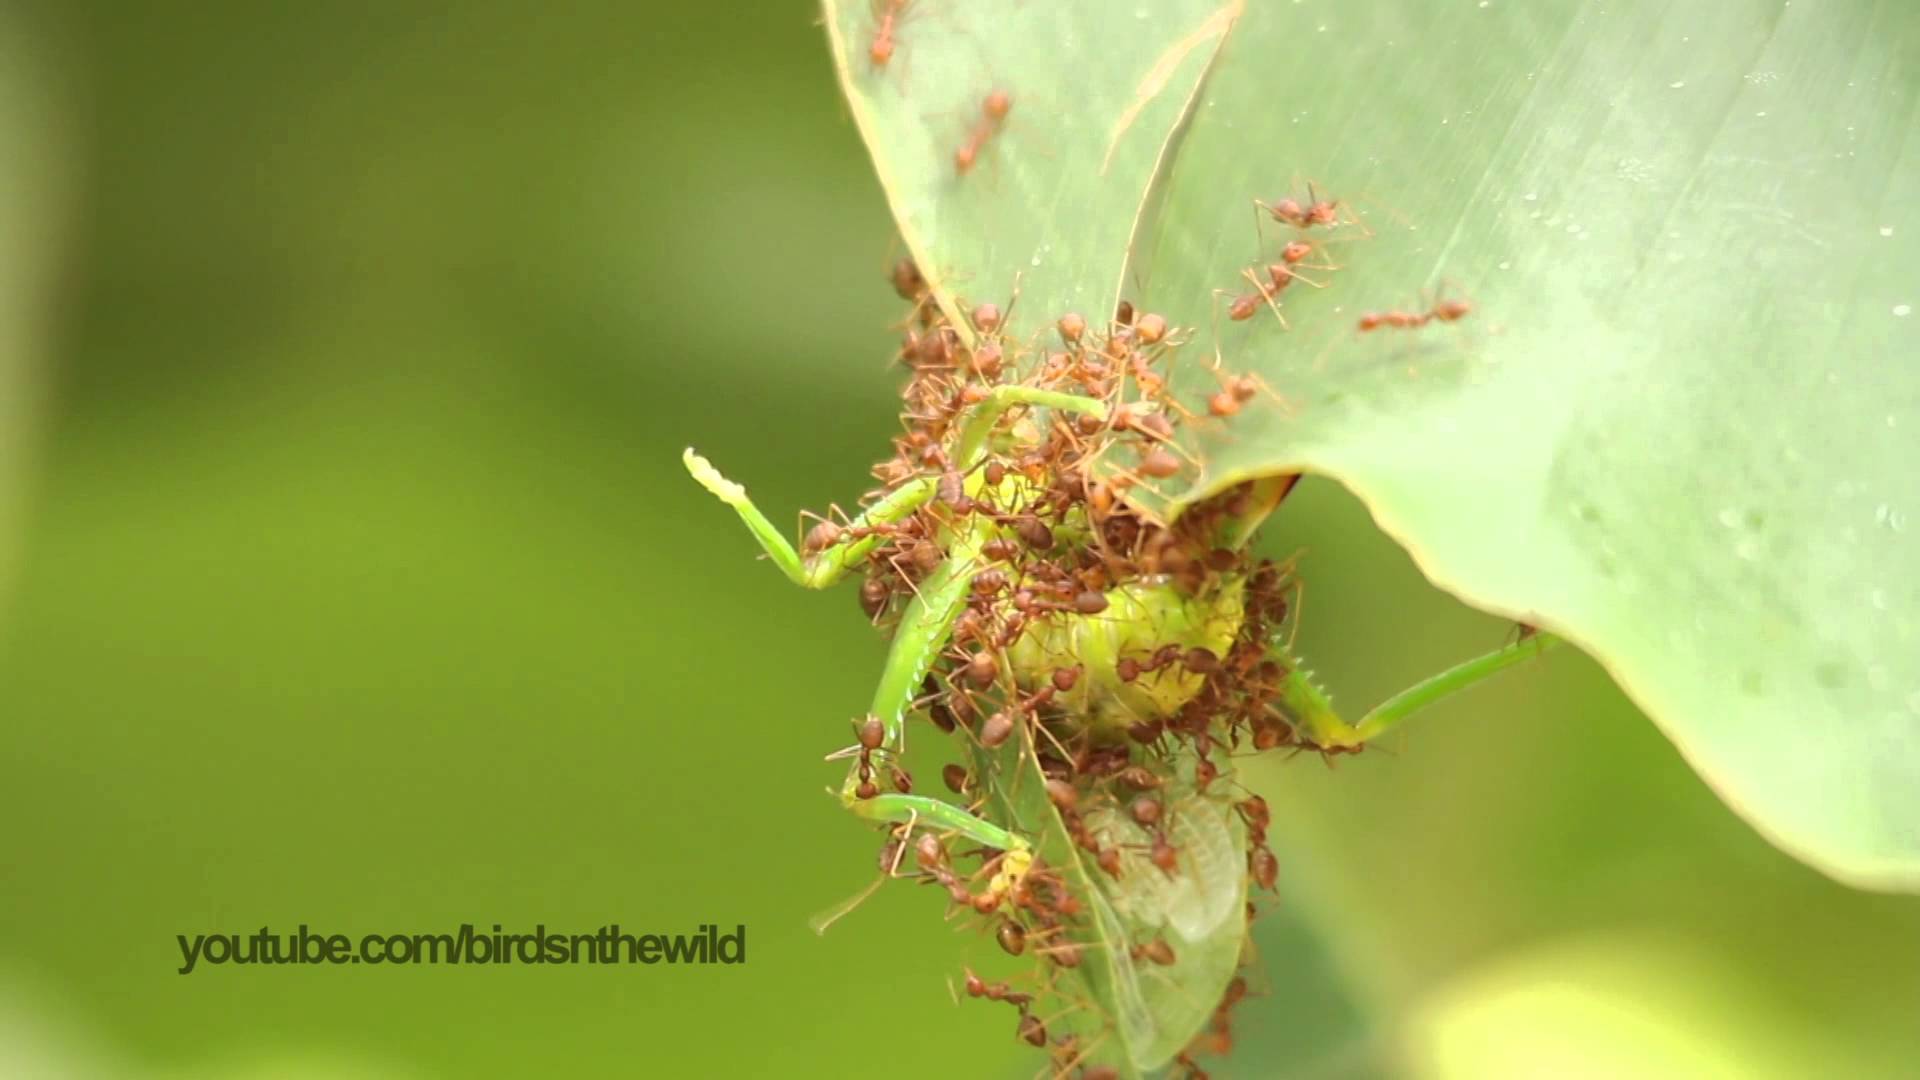 Ants attack and eat giant grasshopper - YouTube